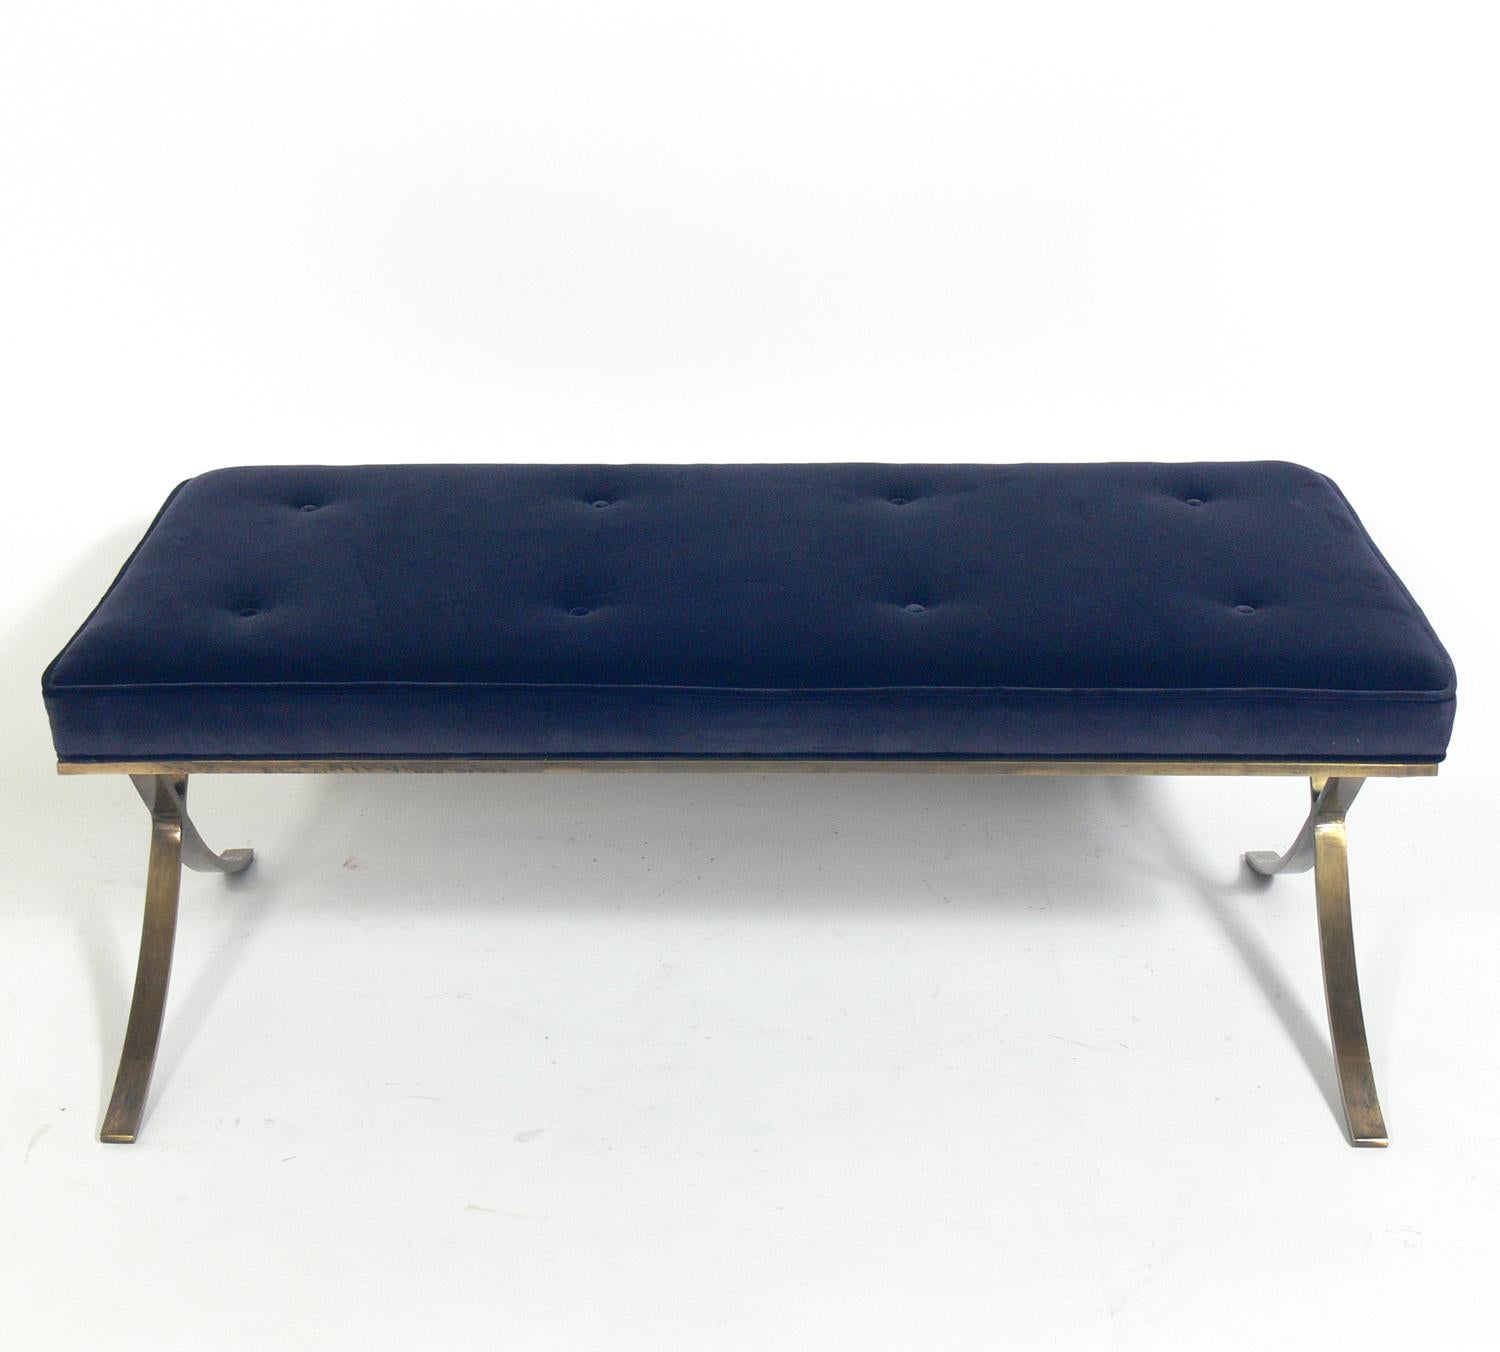 Brass and navy blue velvet Barcelona bench, after a design by Mies van der Rohe, American, circa 2000s. Recently reupholstered in a navy blue velvet over the patinated brass plated metal base.